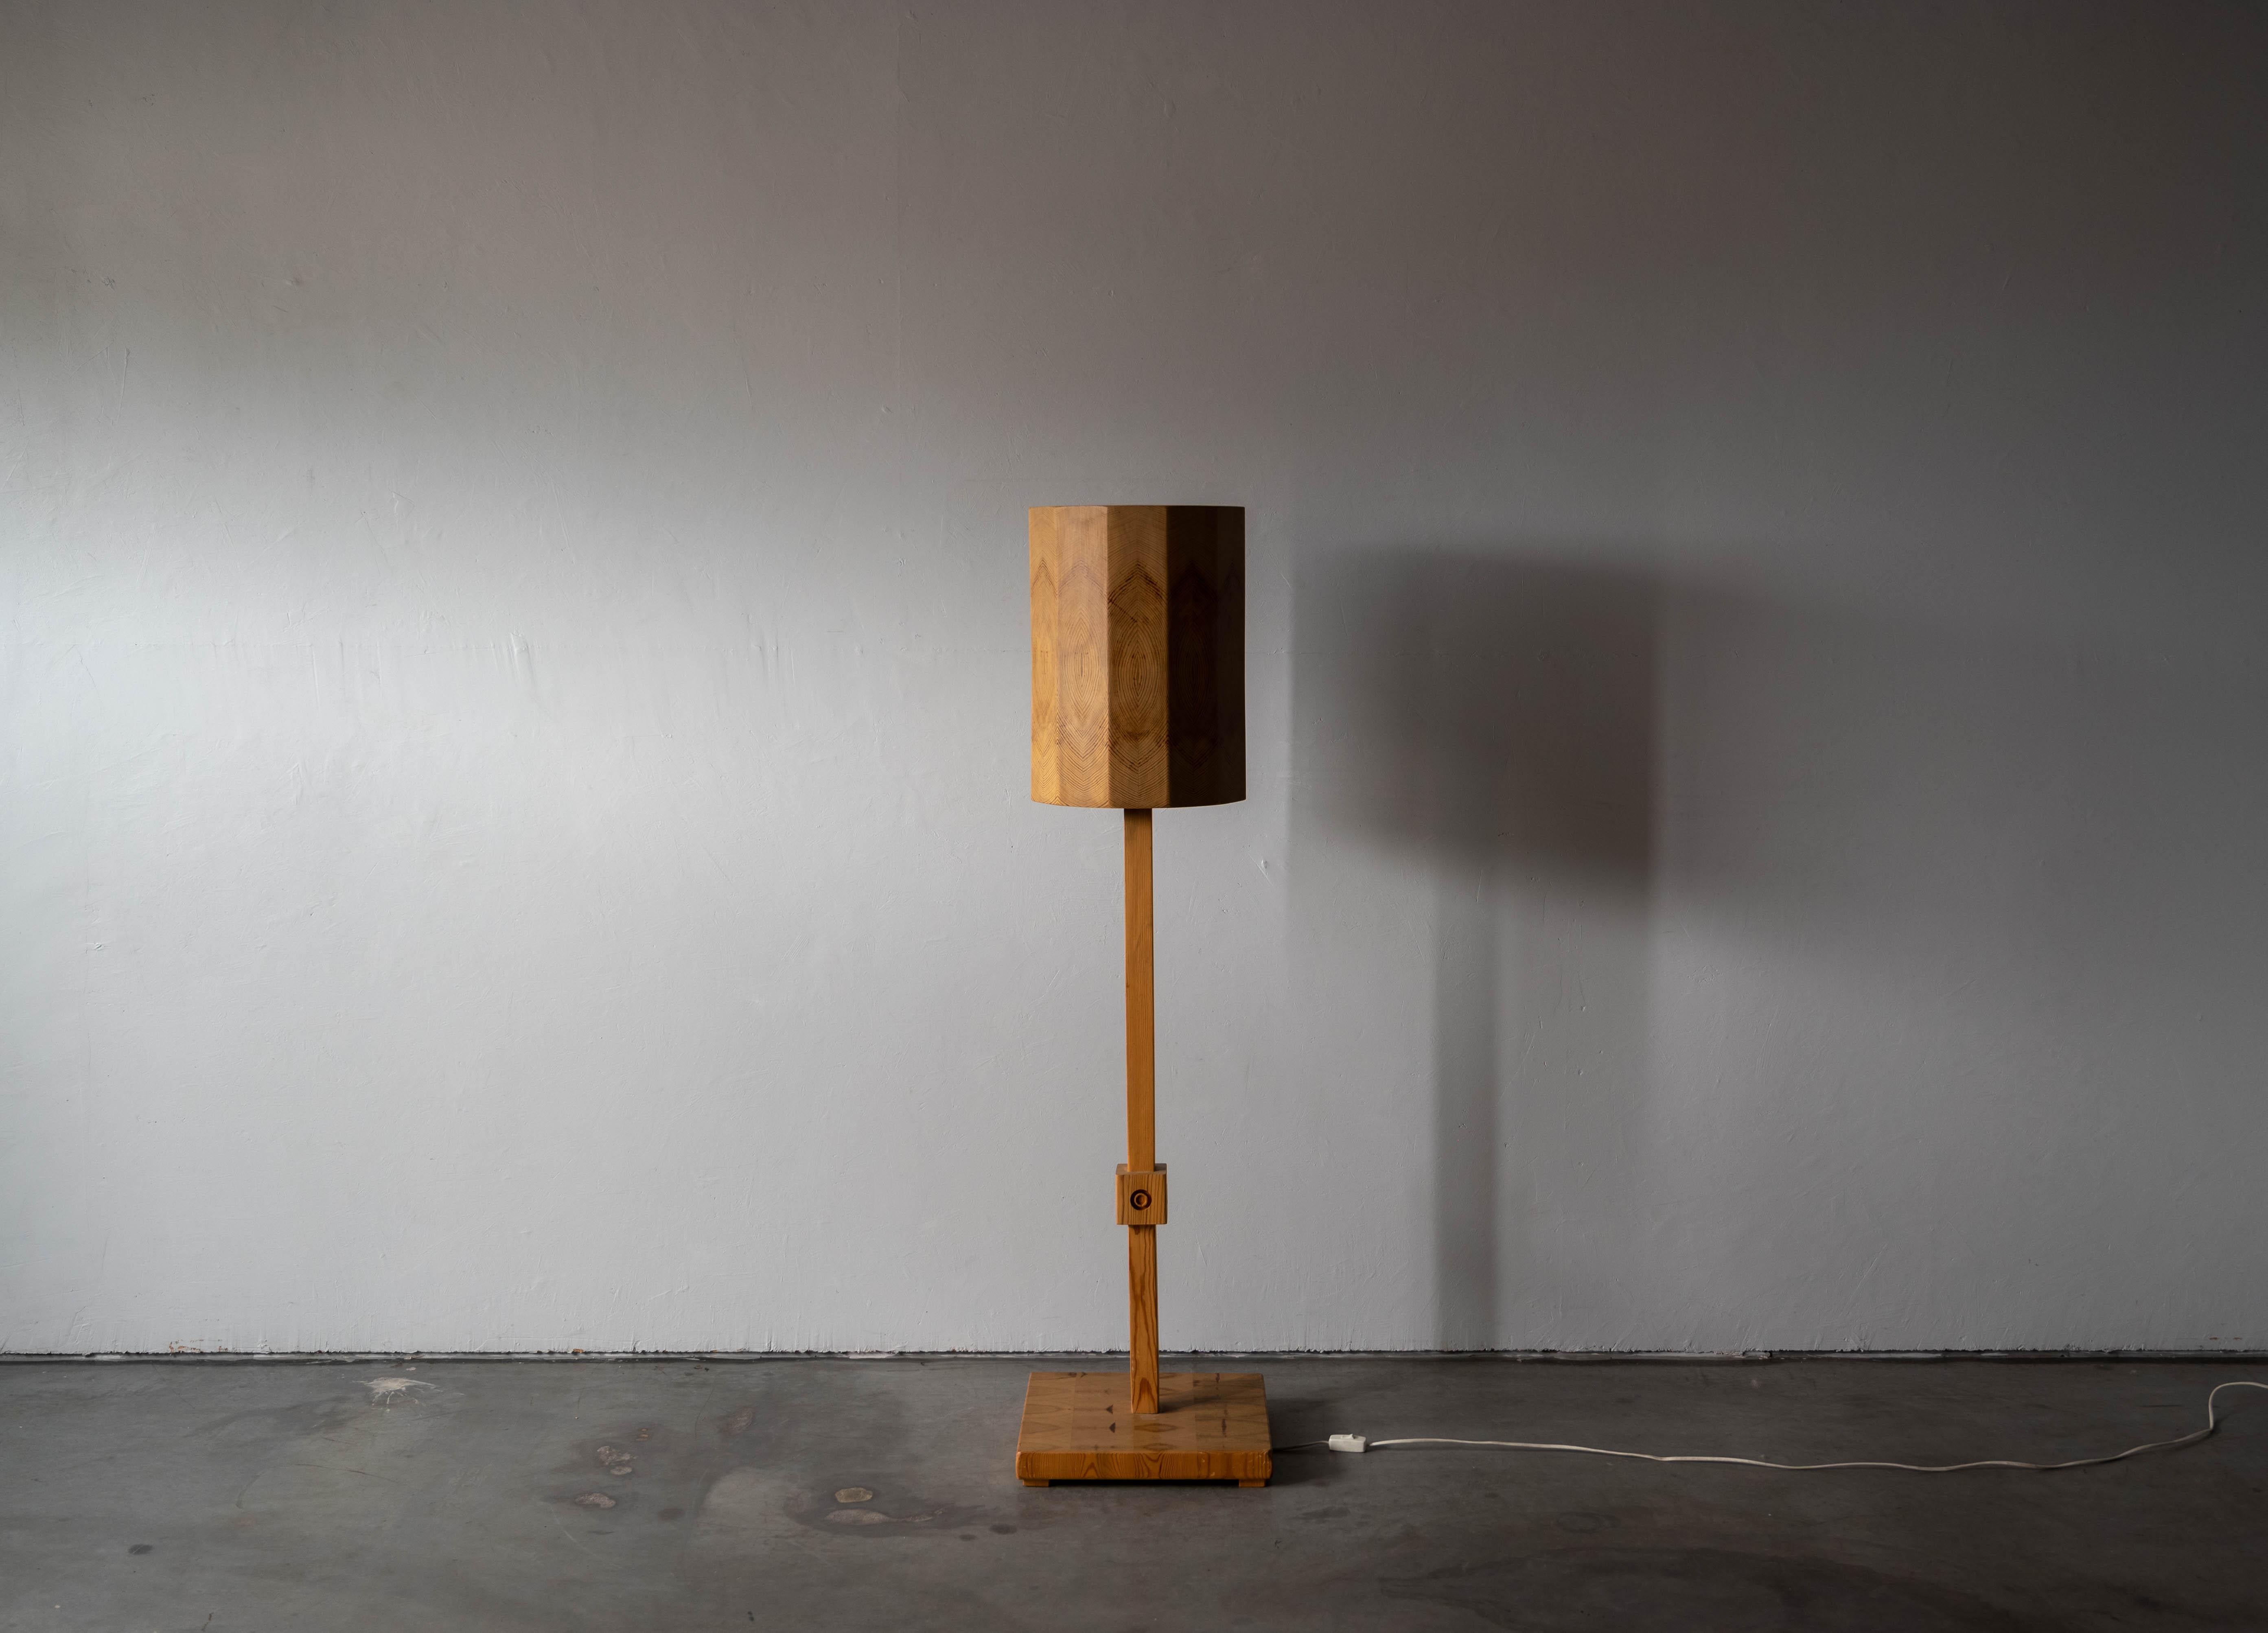 A floor lamp. Designed and produced by Leif Wikner, Persåsen Kövra, Sweden, c. 1970s. Signed.

In solid pine. Features a minimal form and simple ornamentation.